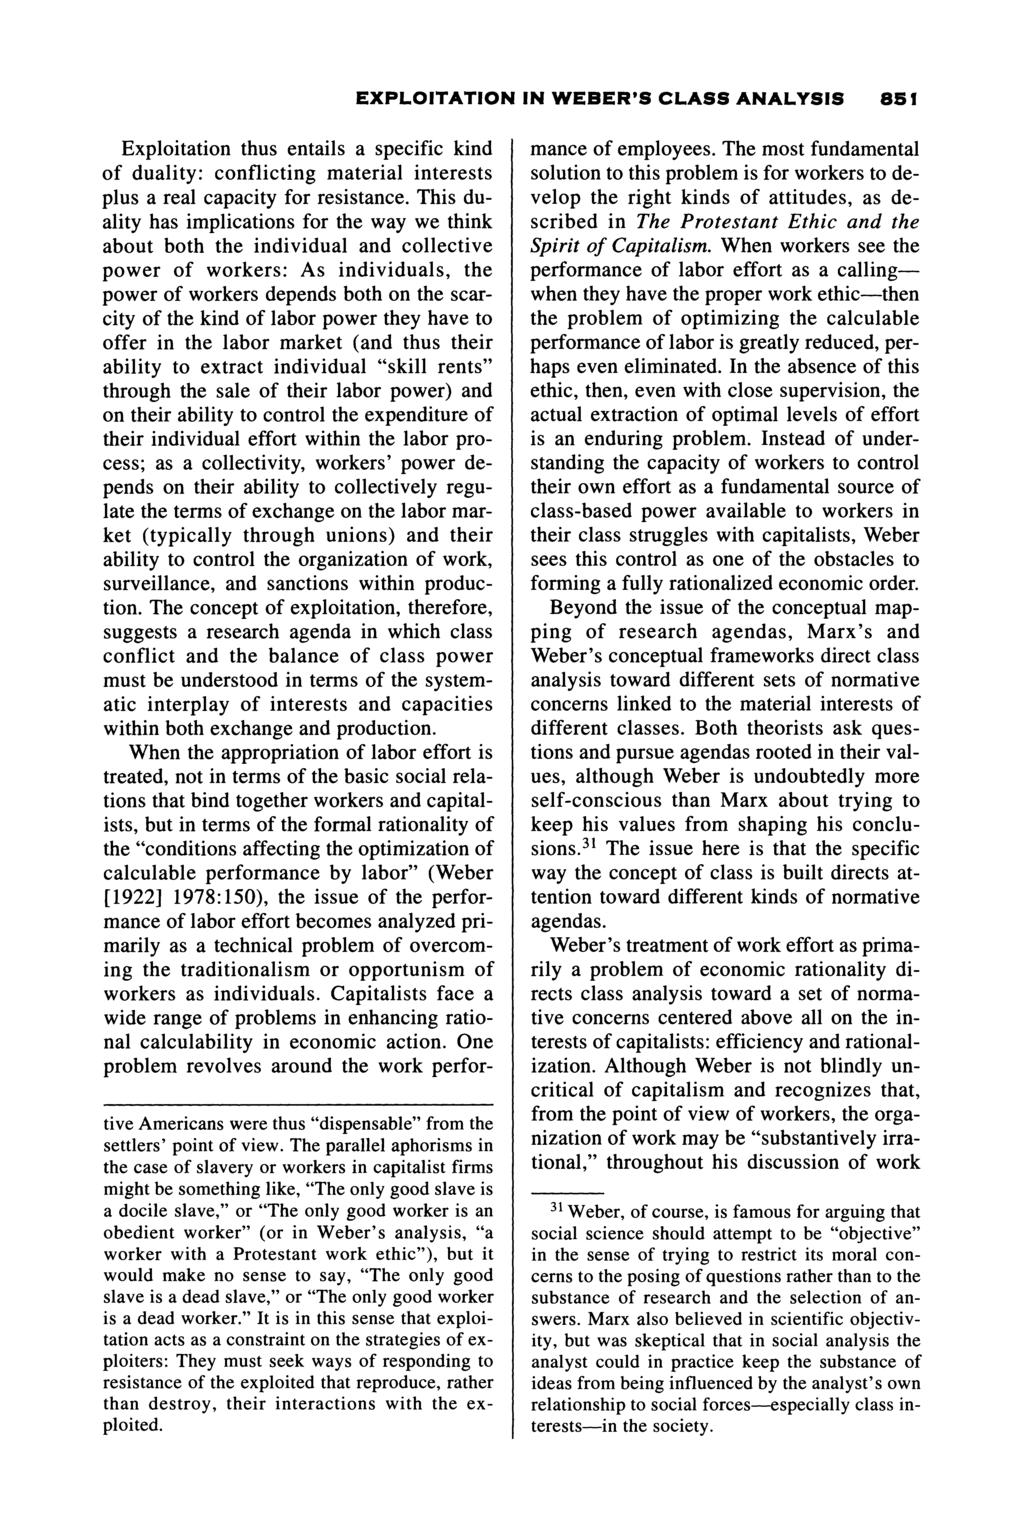 EXPLOITATION IN WEBER'S CLASS ANALYSIS 851 Exploitation thus entails a specific kind of duality: conflicting material interests plus a real capacity for resistance.